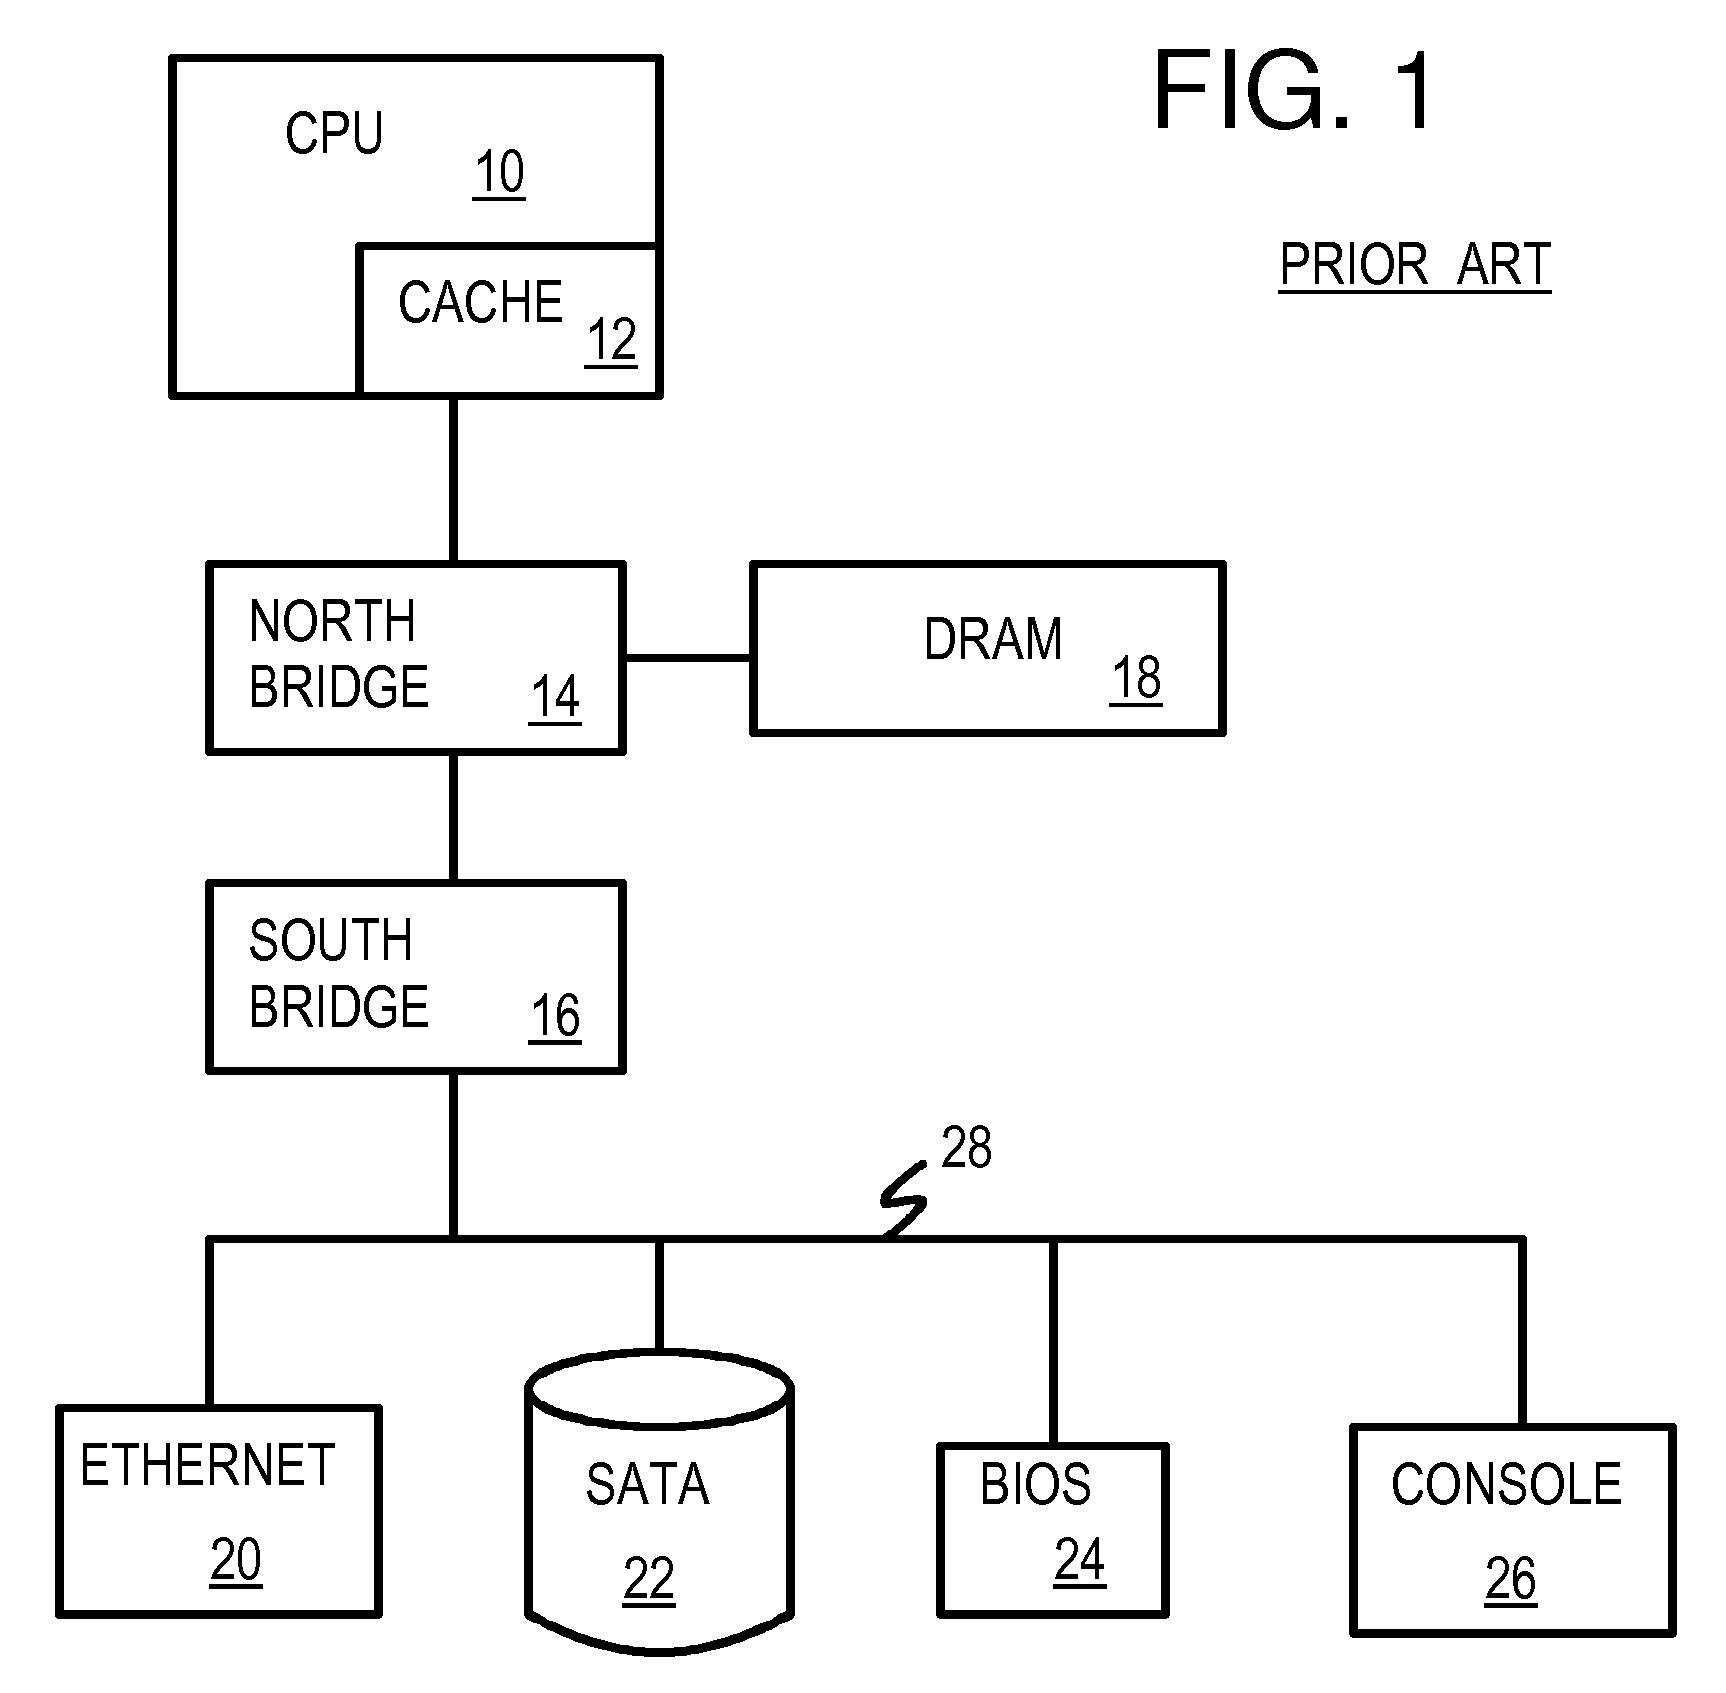 Hardware-based virtualization of BIOS, disks, network-interfaces, and consoles using a direct interconnect fabric